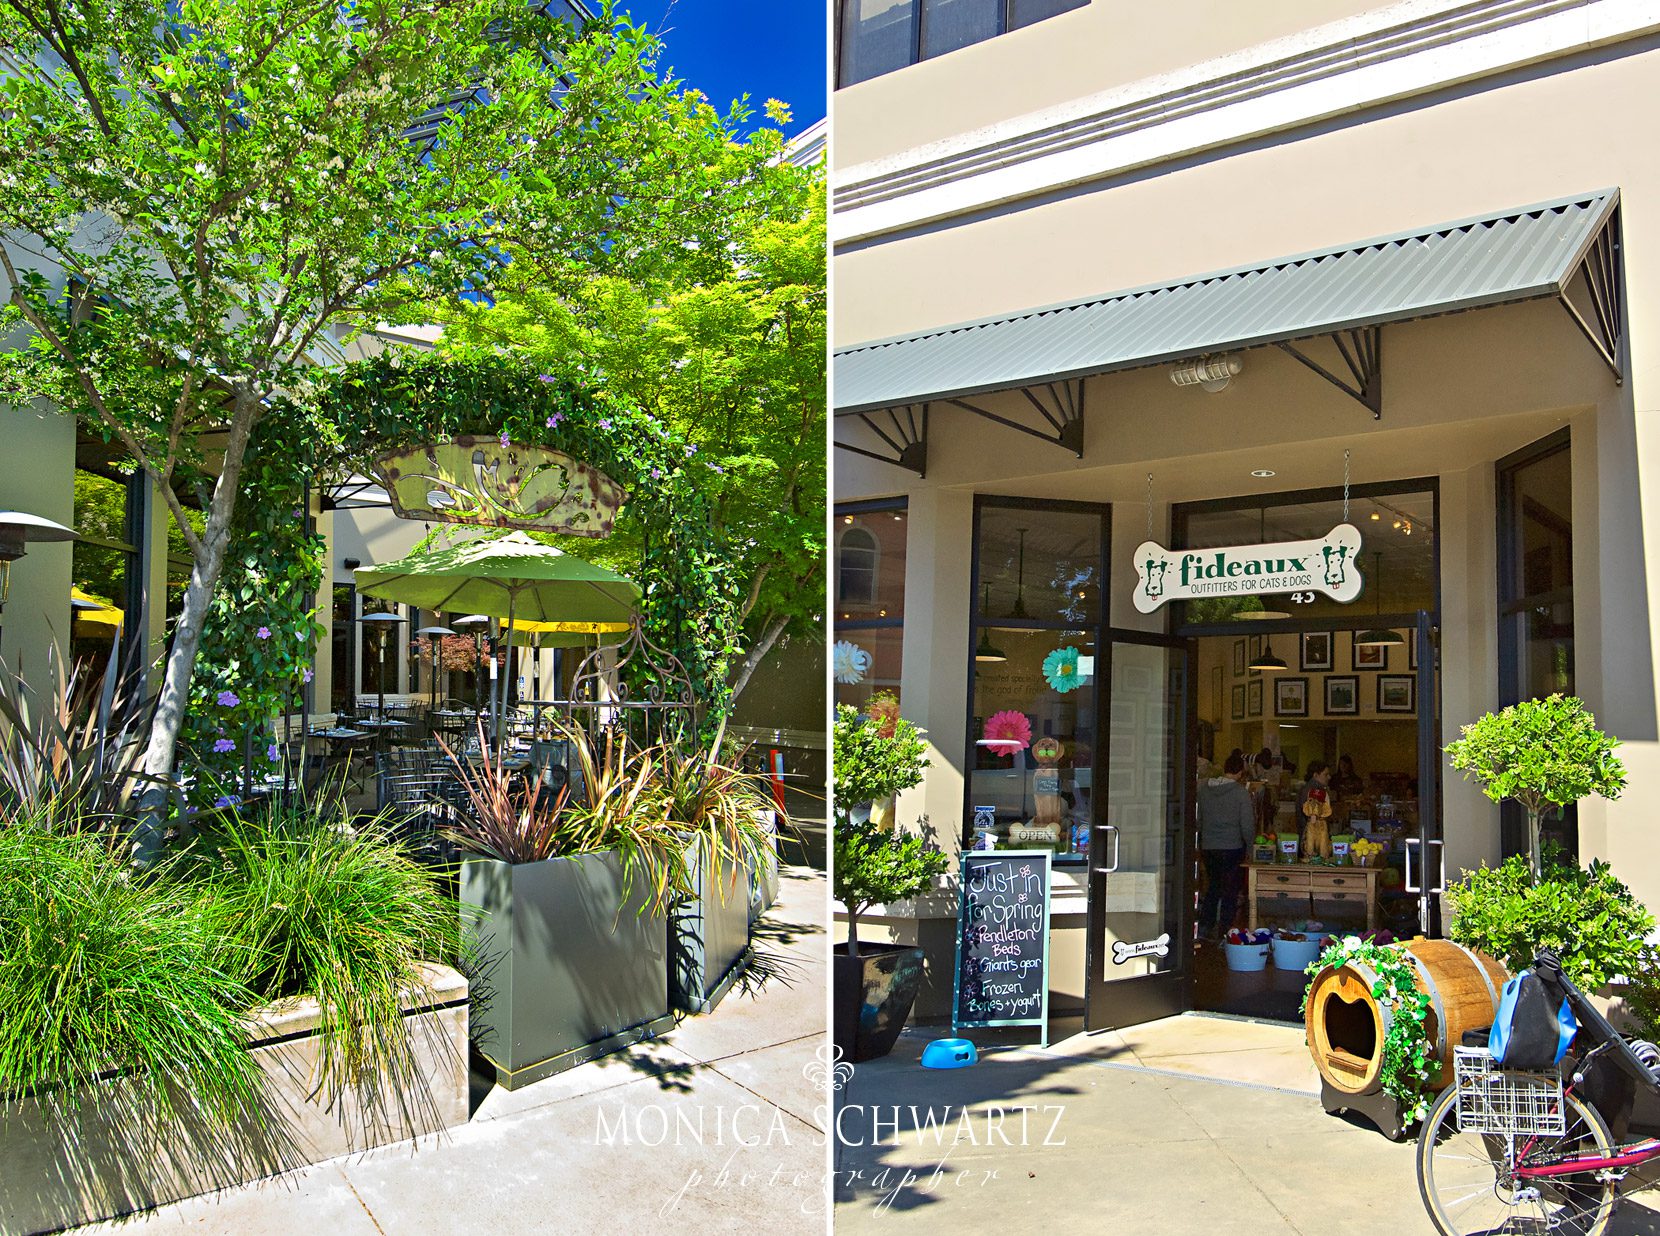 Willis-Seafood-and-Raw-Bar-and-Fideaux-pet-store-in-Healdsburg-California